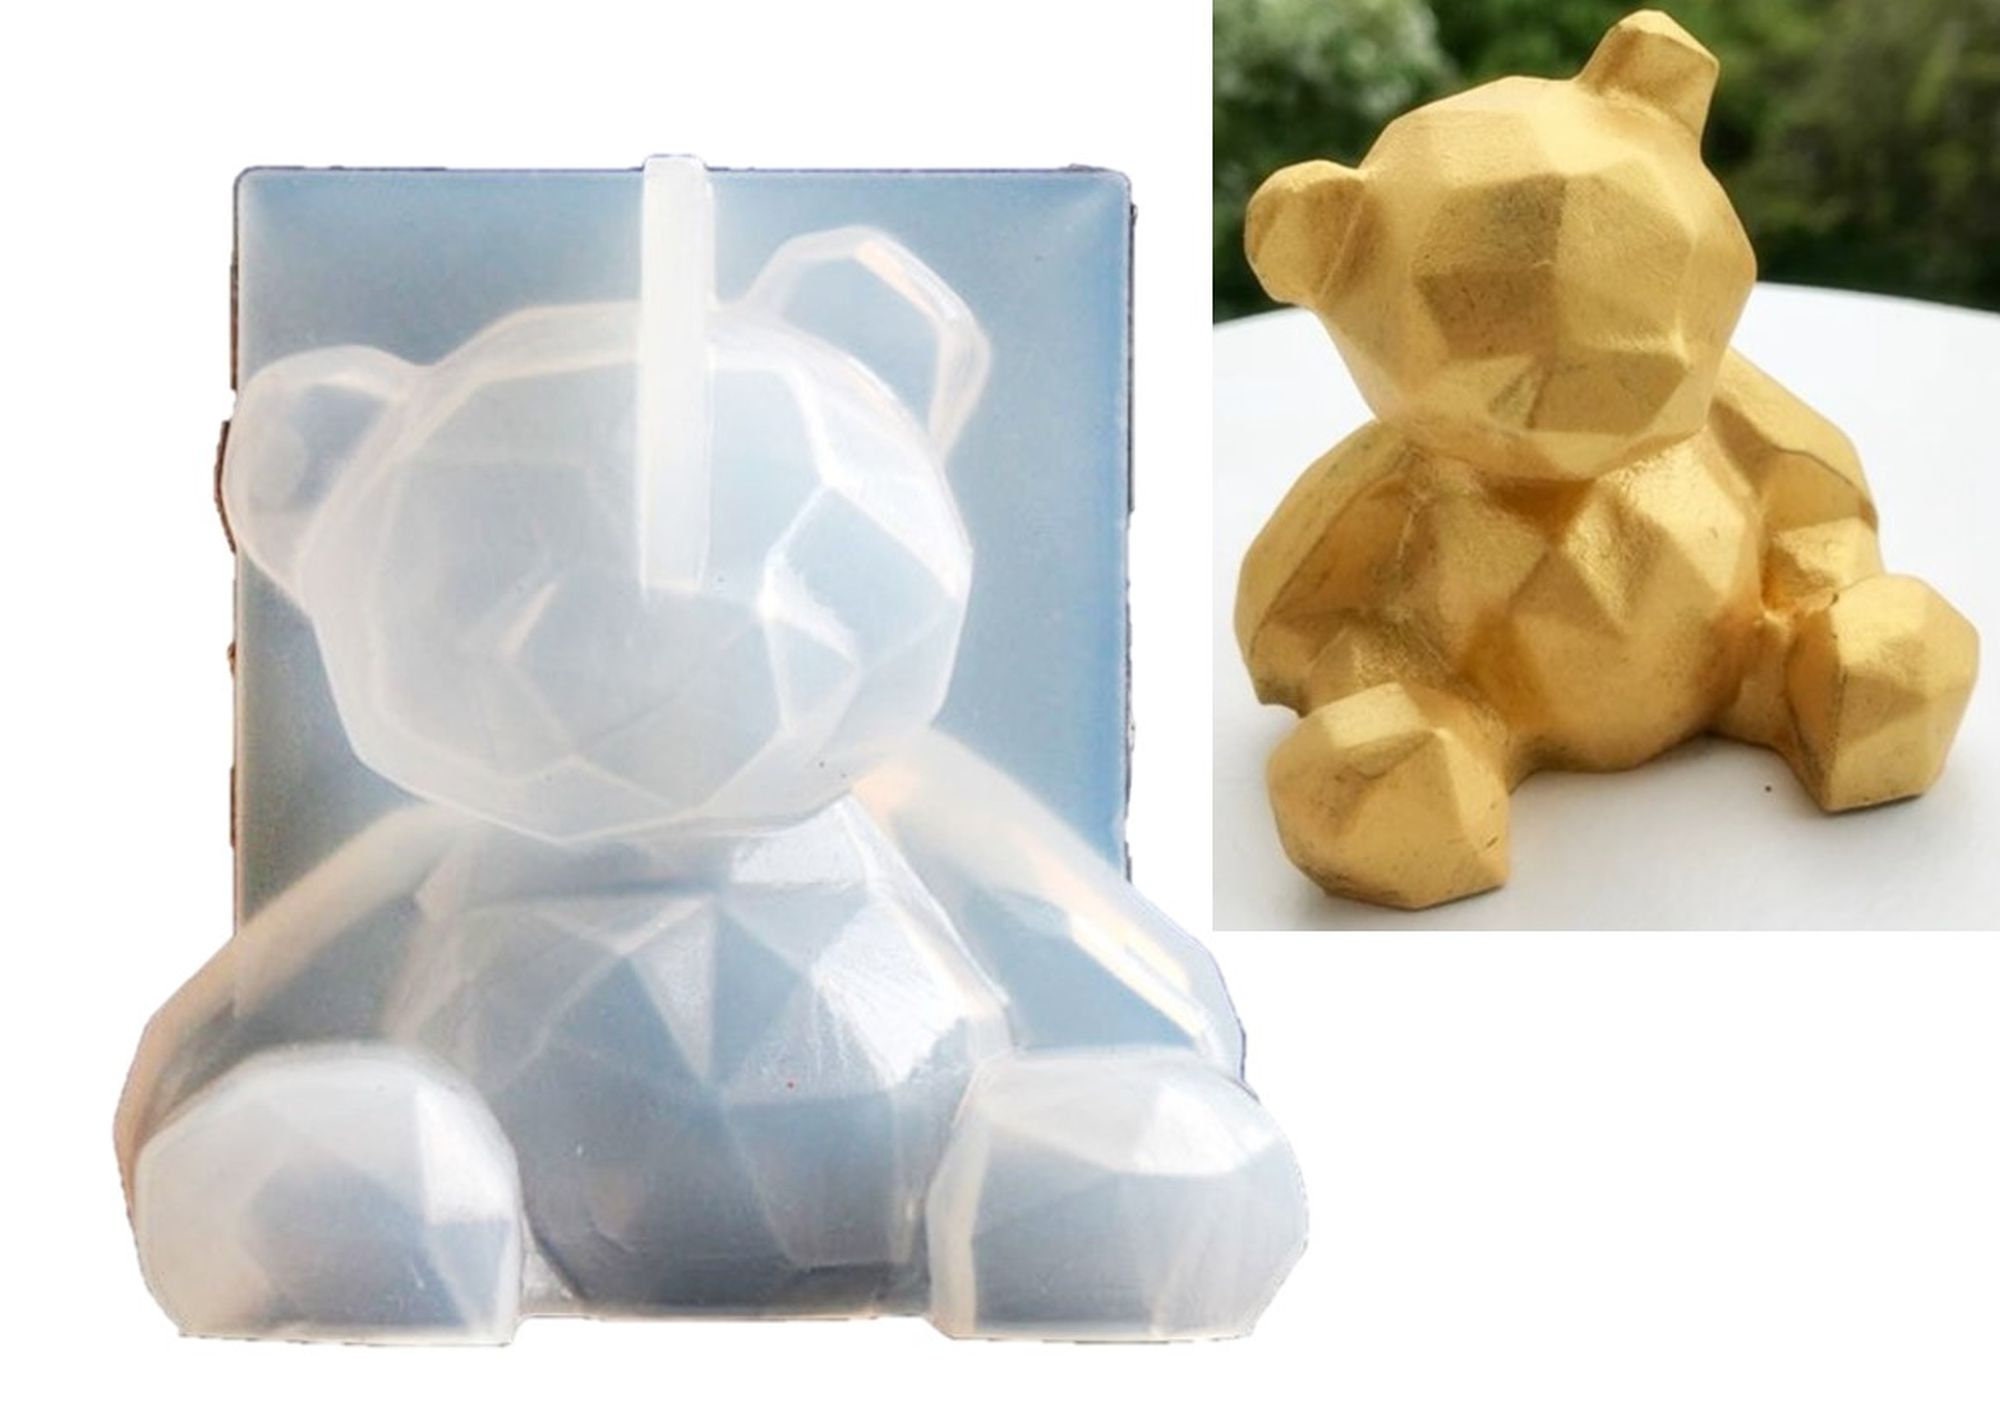 TEDDY Bear With Heart 3D Silicone Mold Silicone Mould Soap Mold Candle Mold  Plaster Mold, Cute Bear Mold, Heart Mold, Teddy Holding Heart 